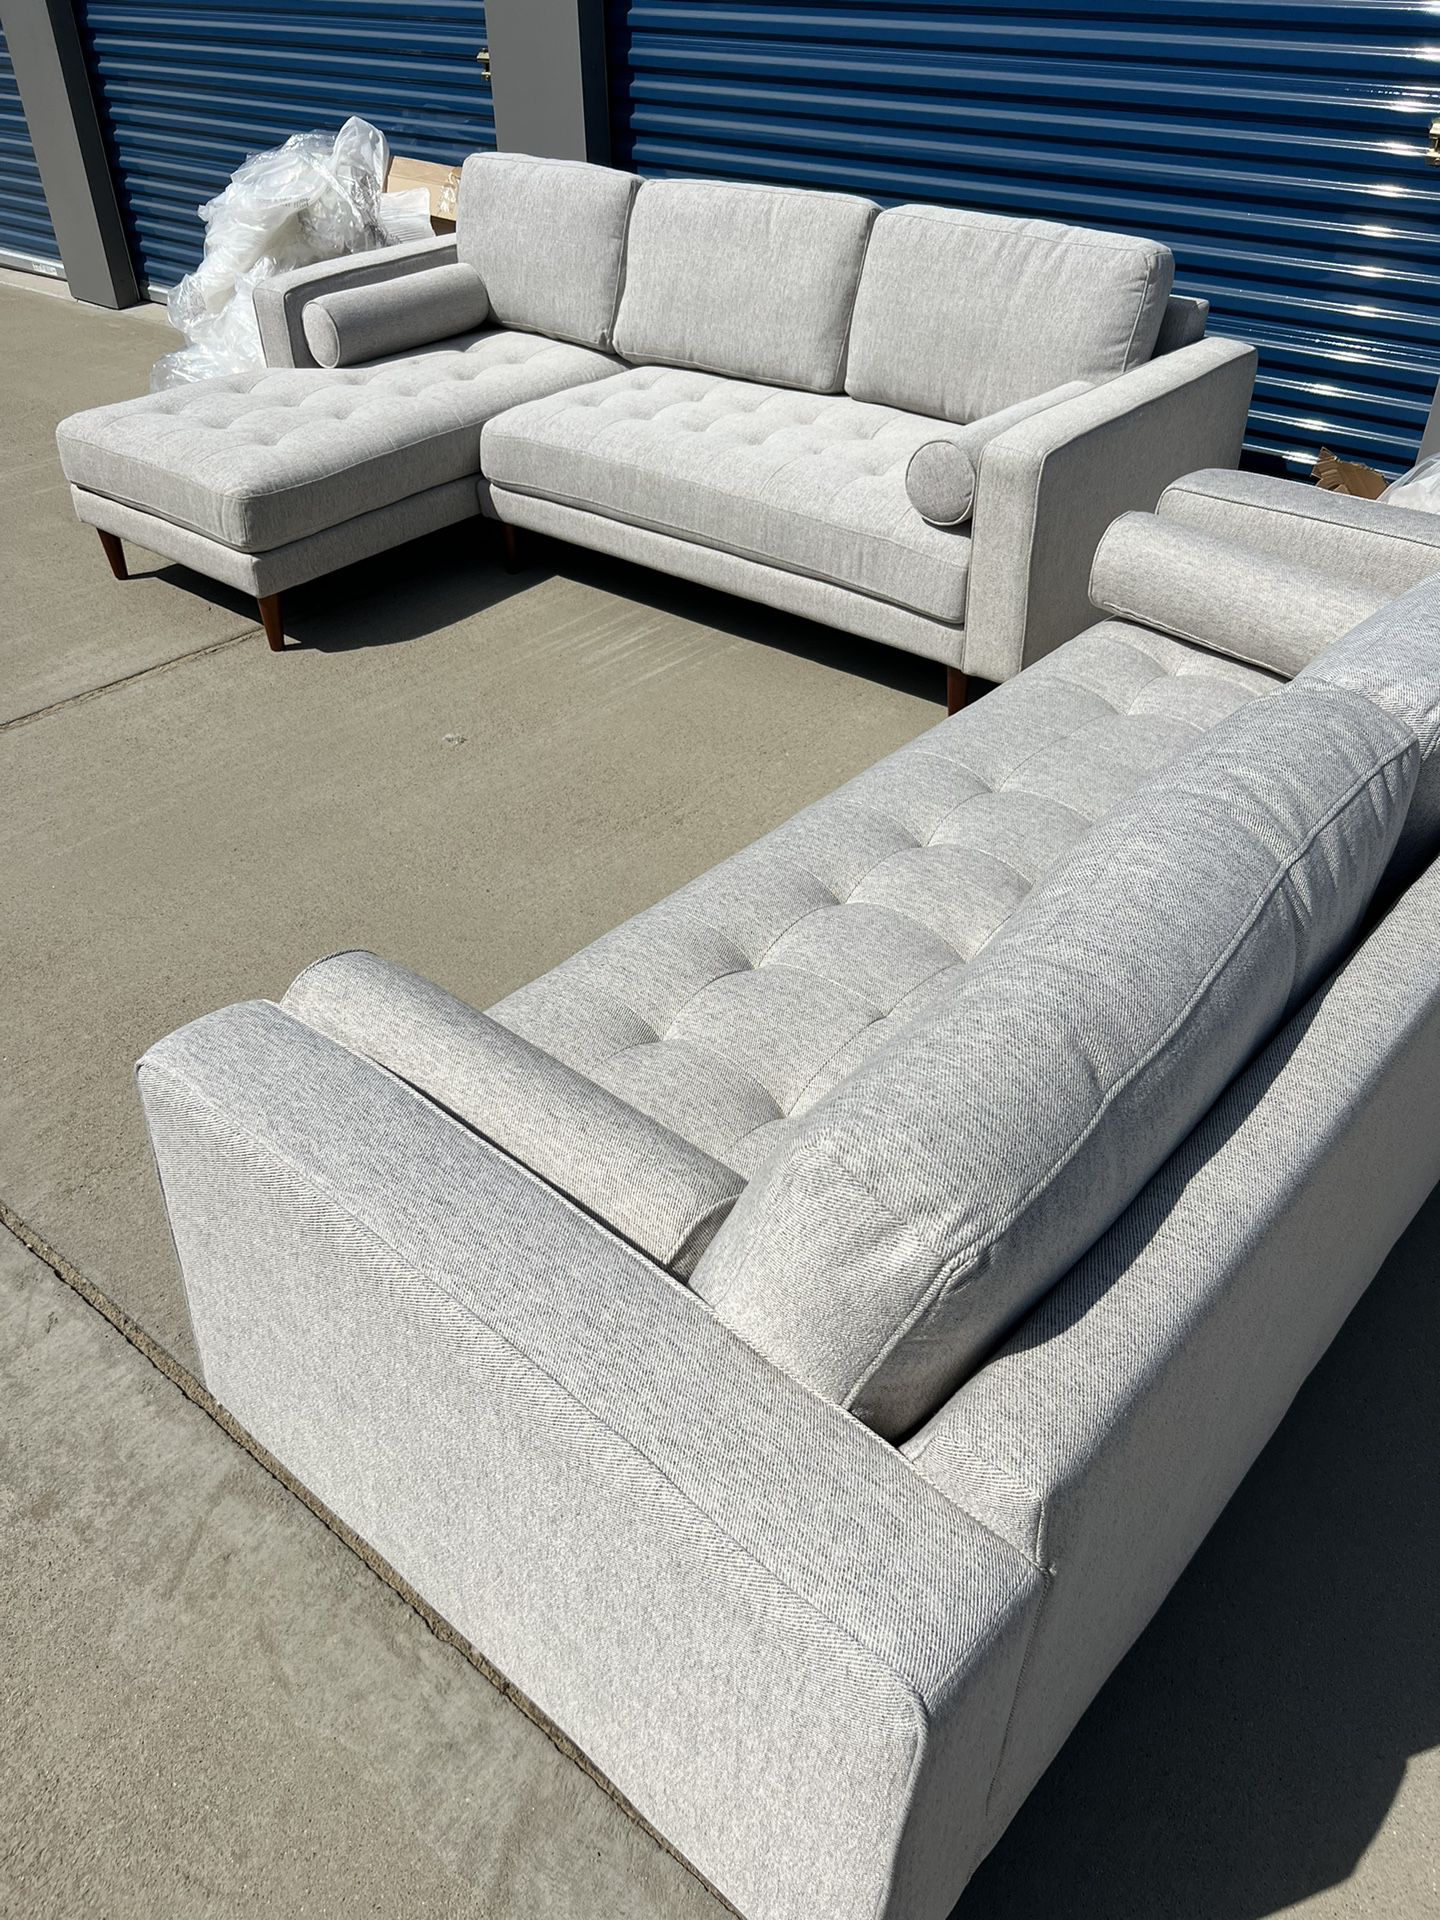 Brand New. Mid Century Modern Sectional And Sofa Set. Retails Over $3700